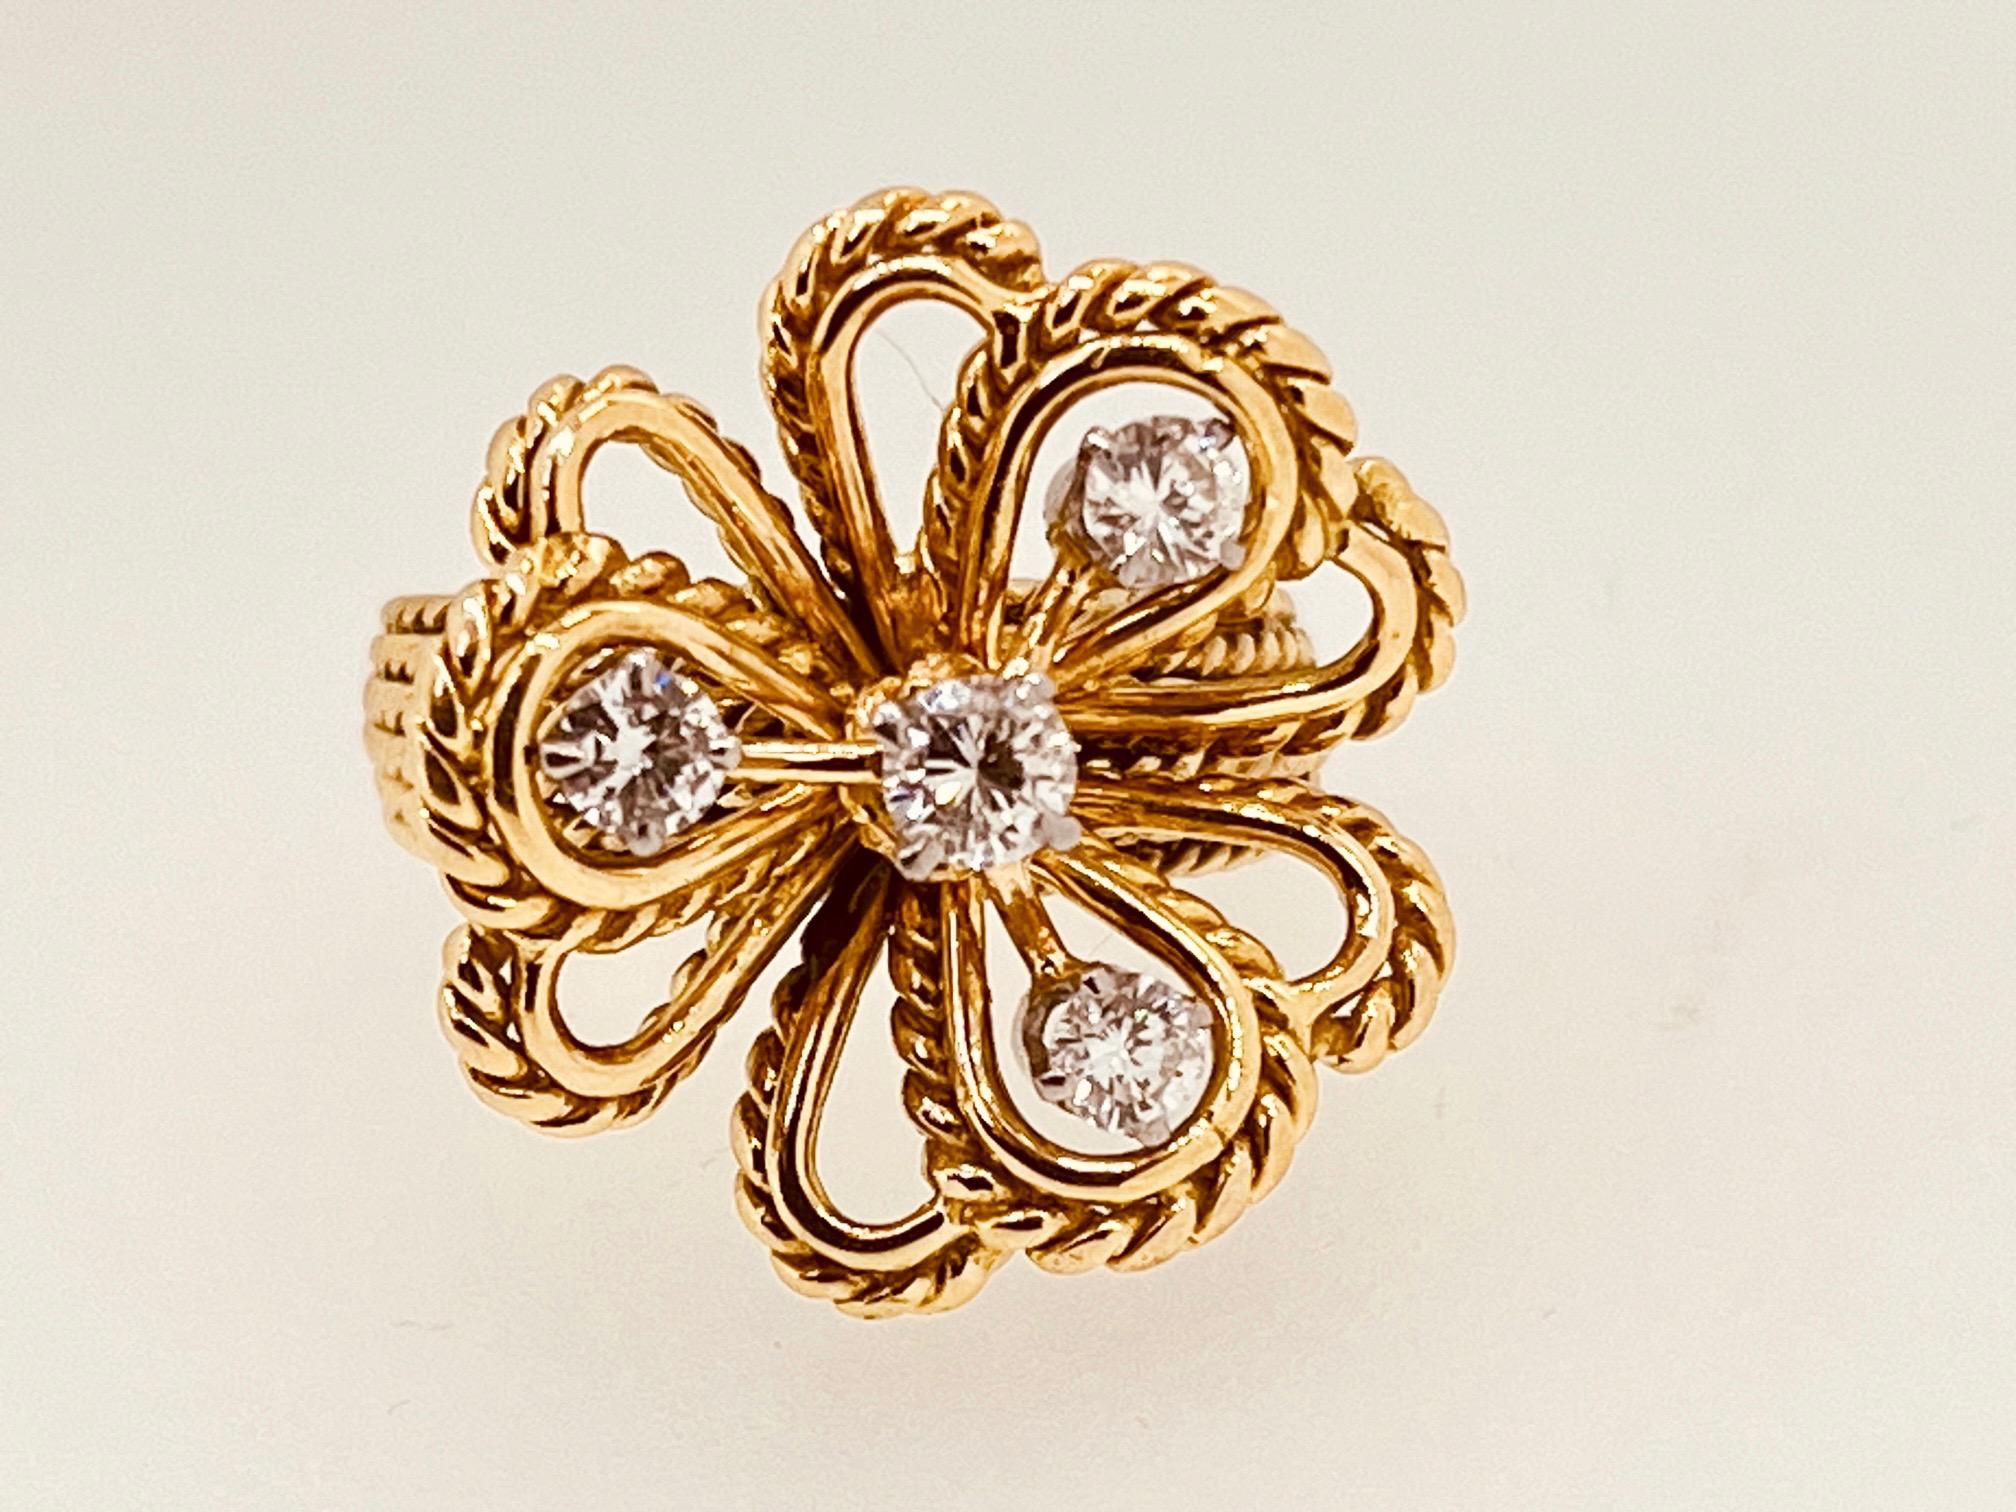 Tested 18ct Gold Flower Vintage Ring with 0.5ct Diamonds. Circa 1960s. The yellow gold flower suspended four brilliant round cut diamonds, approx. 0.5ct. Weight 10.7grams. Ring is resizable. Size is: L (UK), 52 (EU), 6 (US), 16.3mm (inside ring